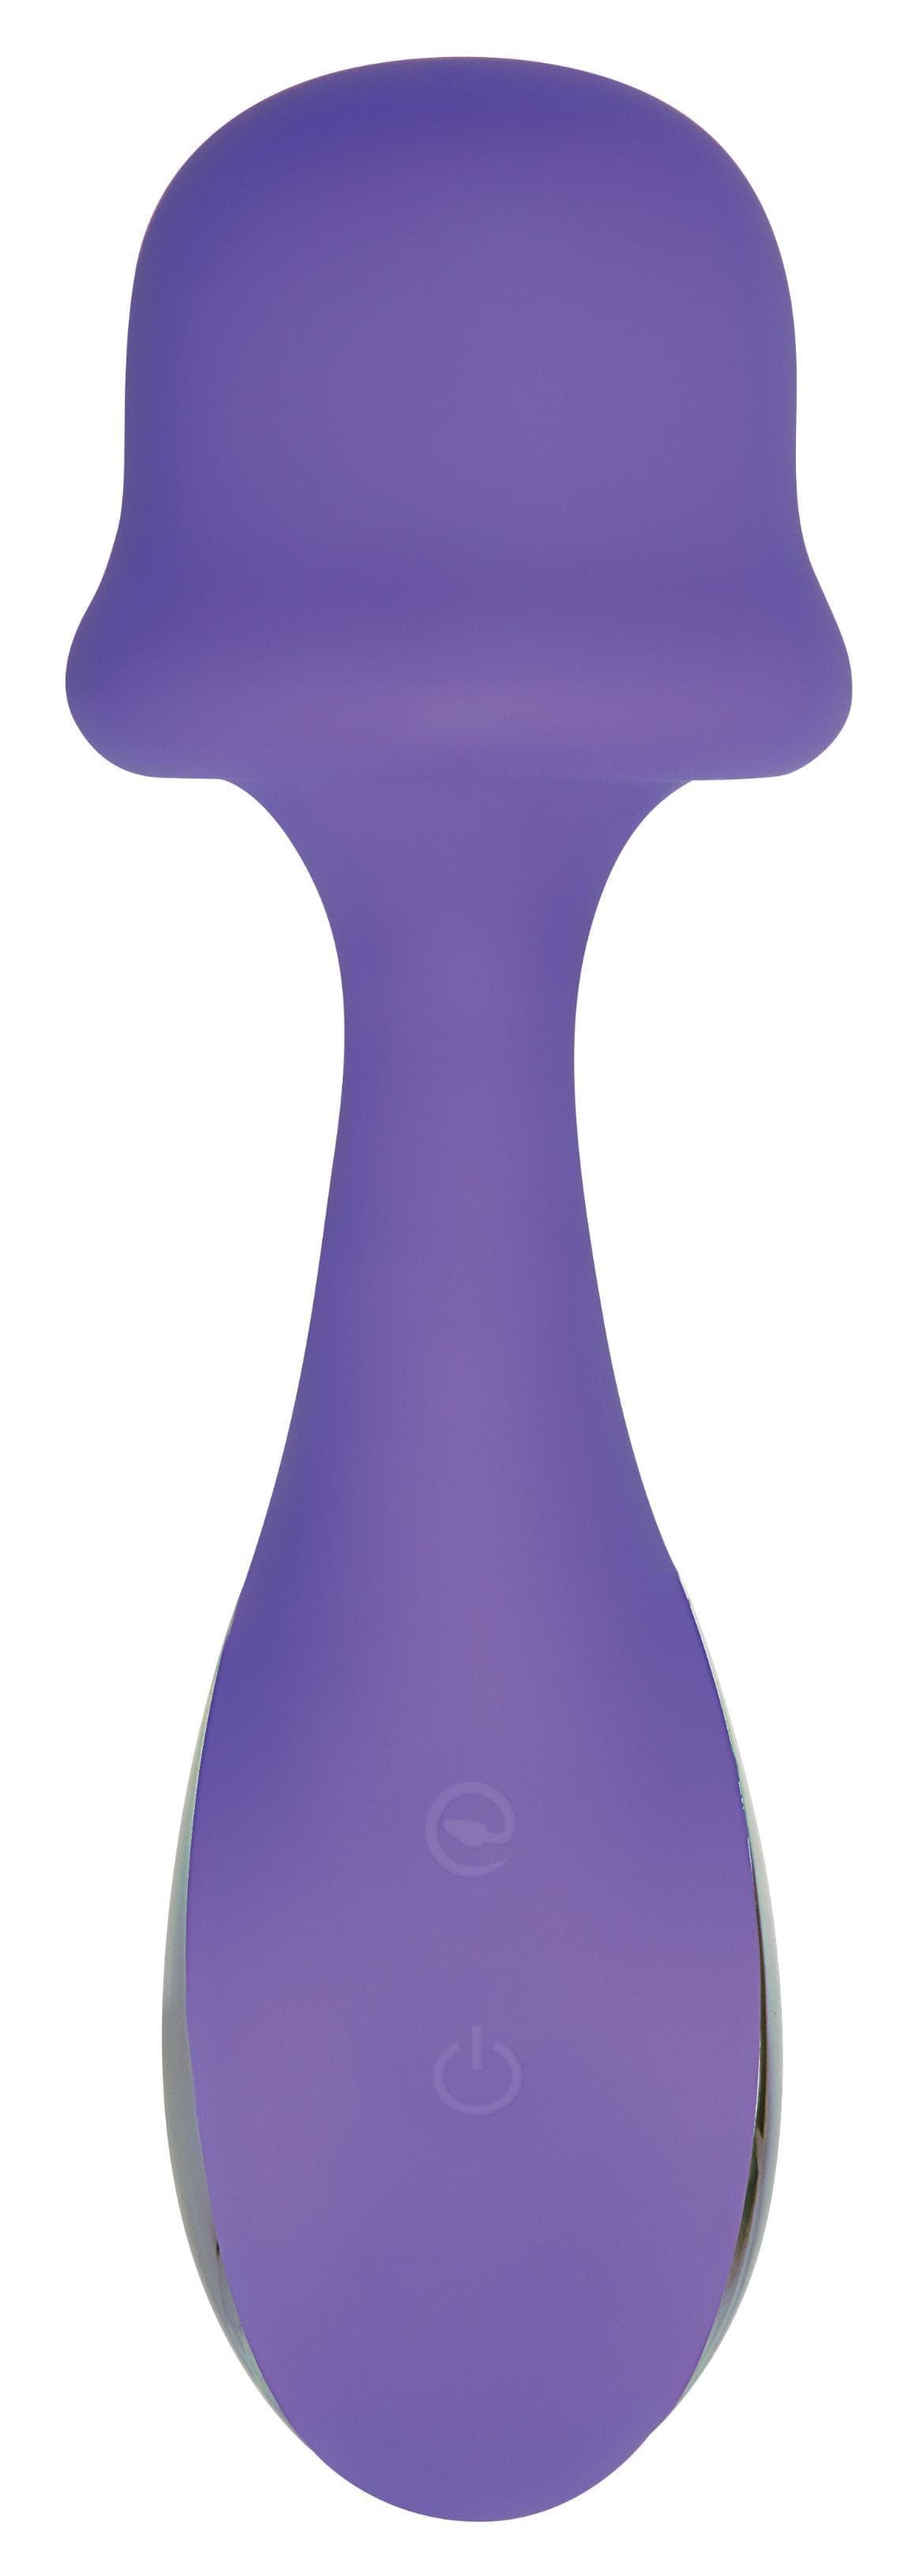 adam and eve the sensual touch wand massager purple     Adam and Eve Products